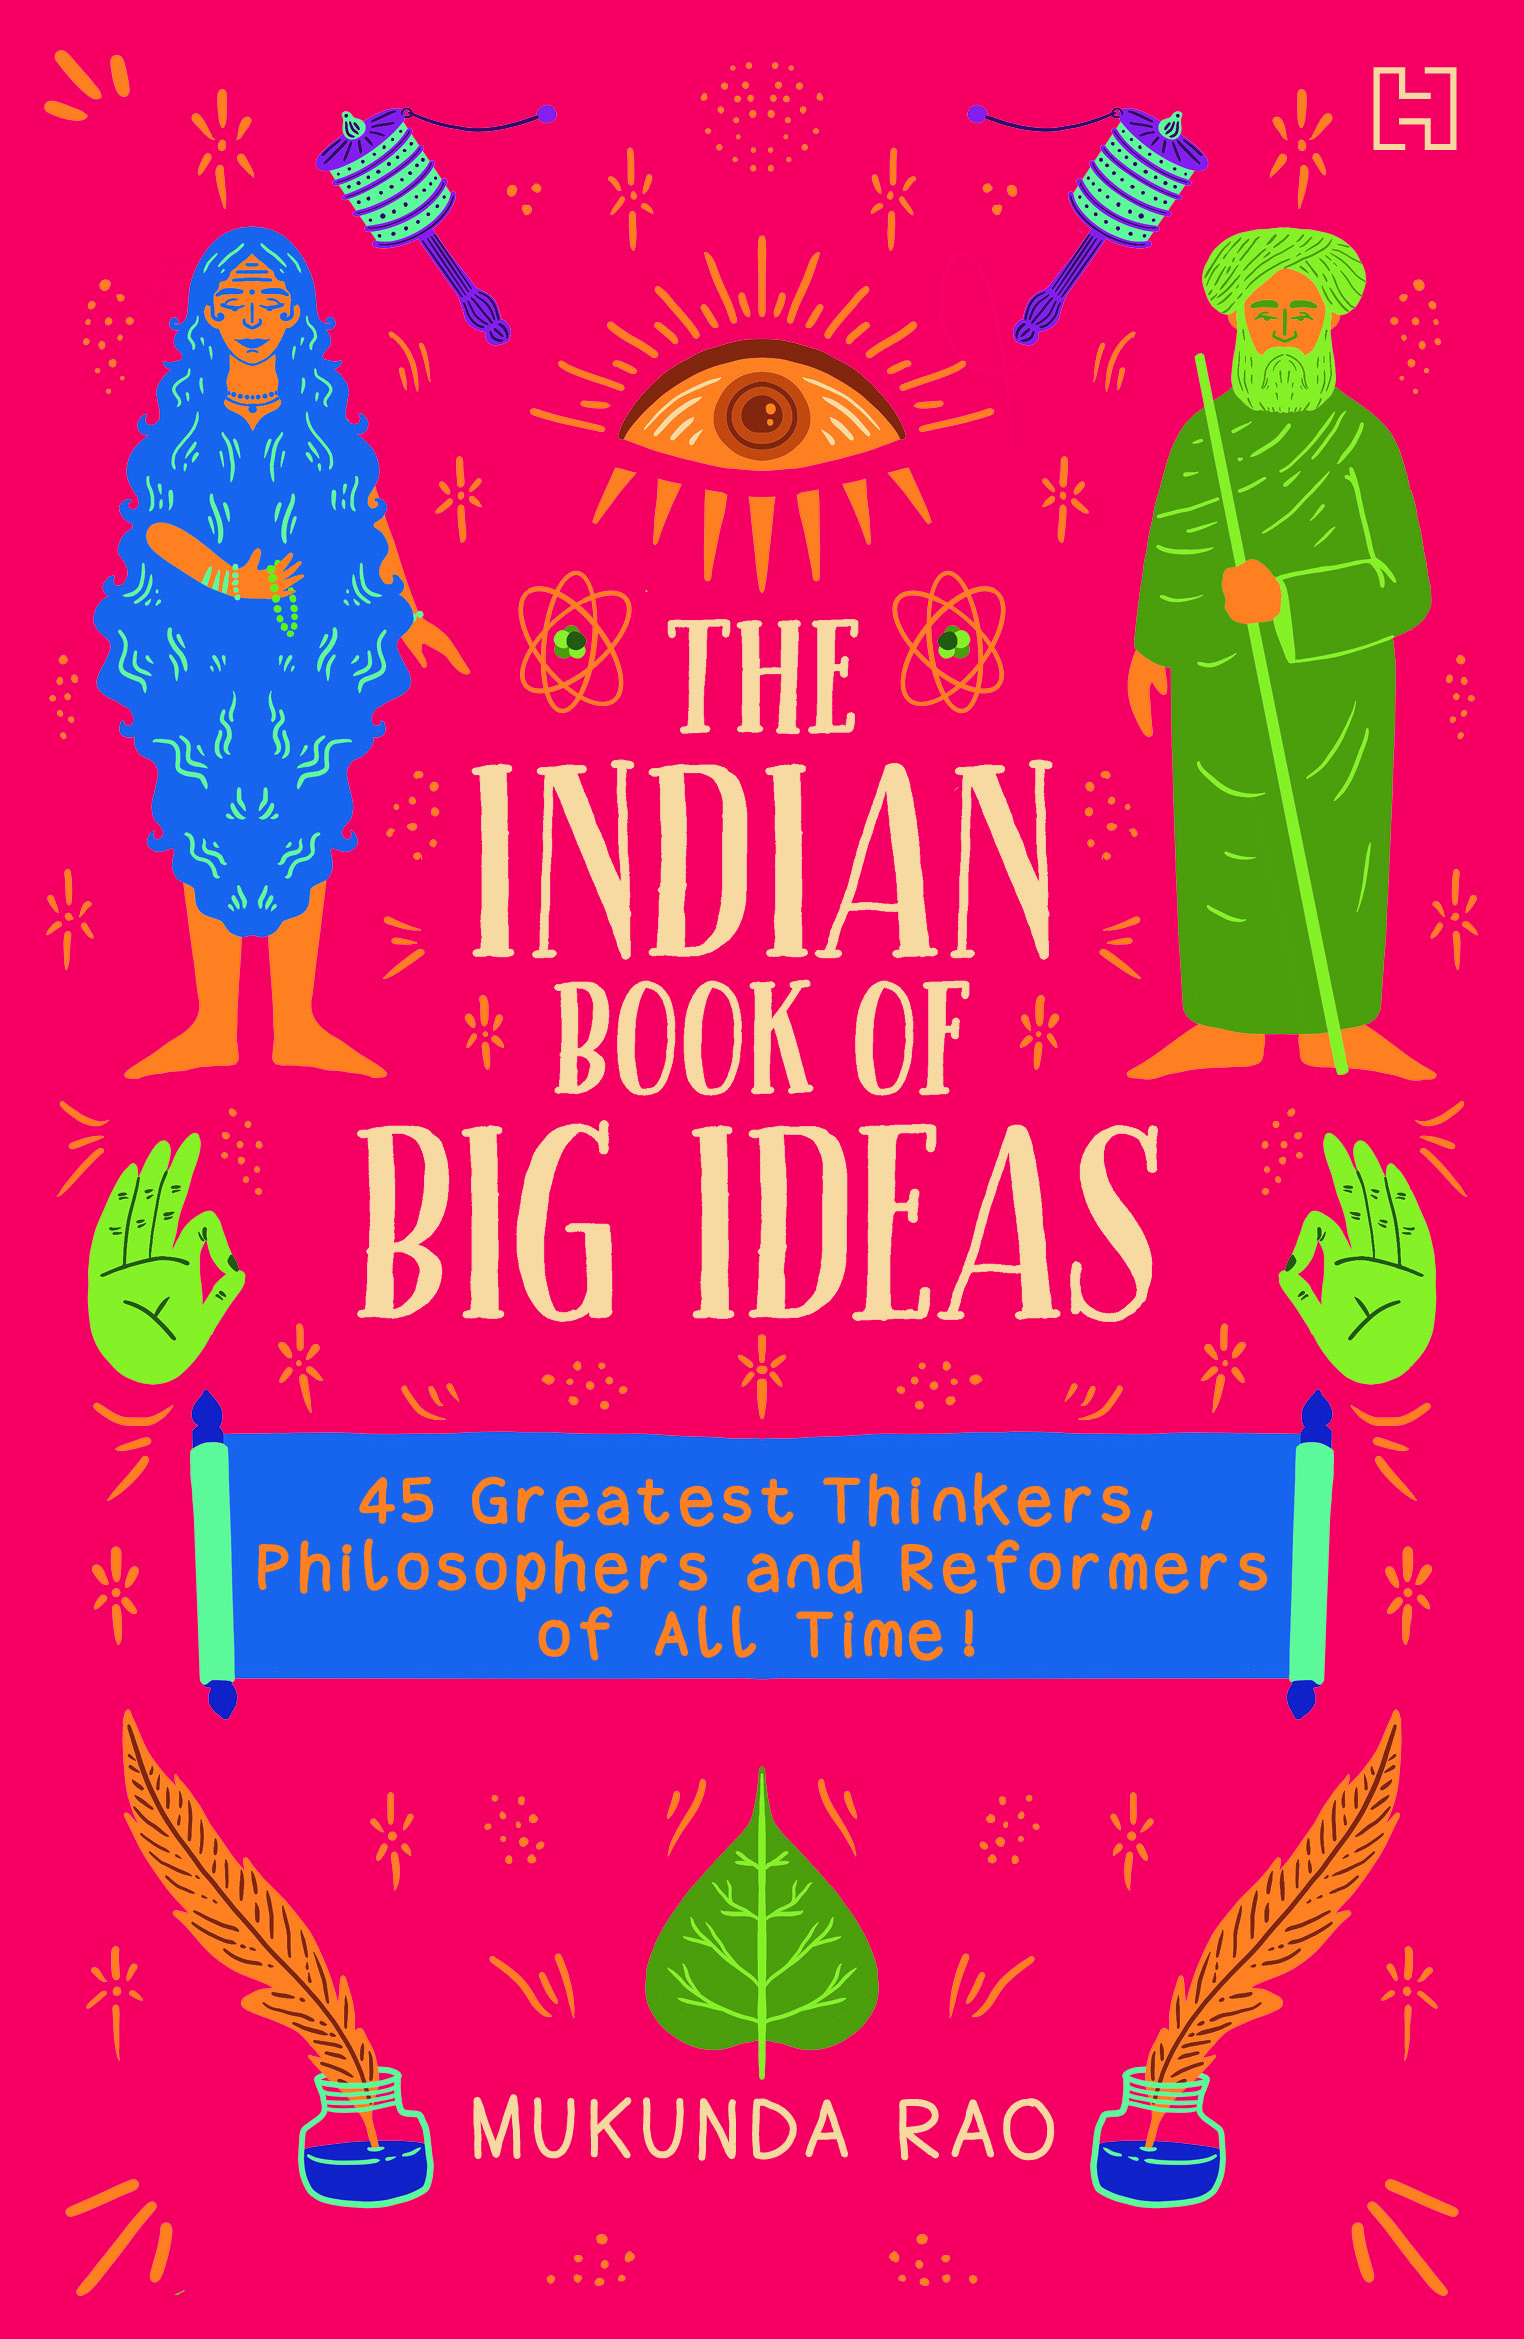 The Indian Book of Big Ideas